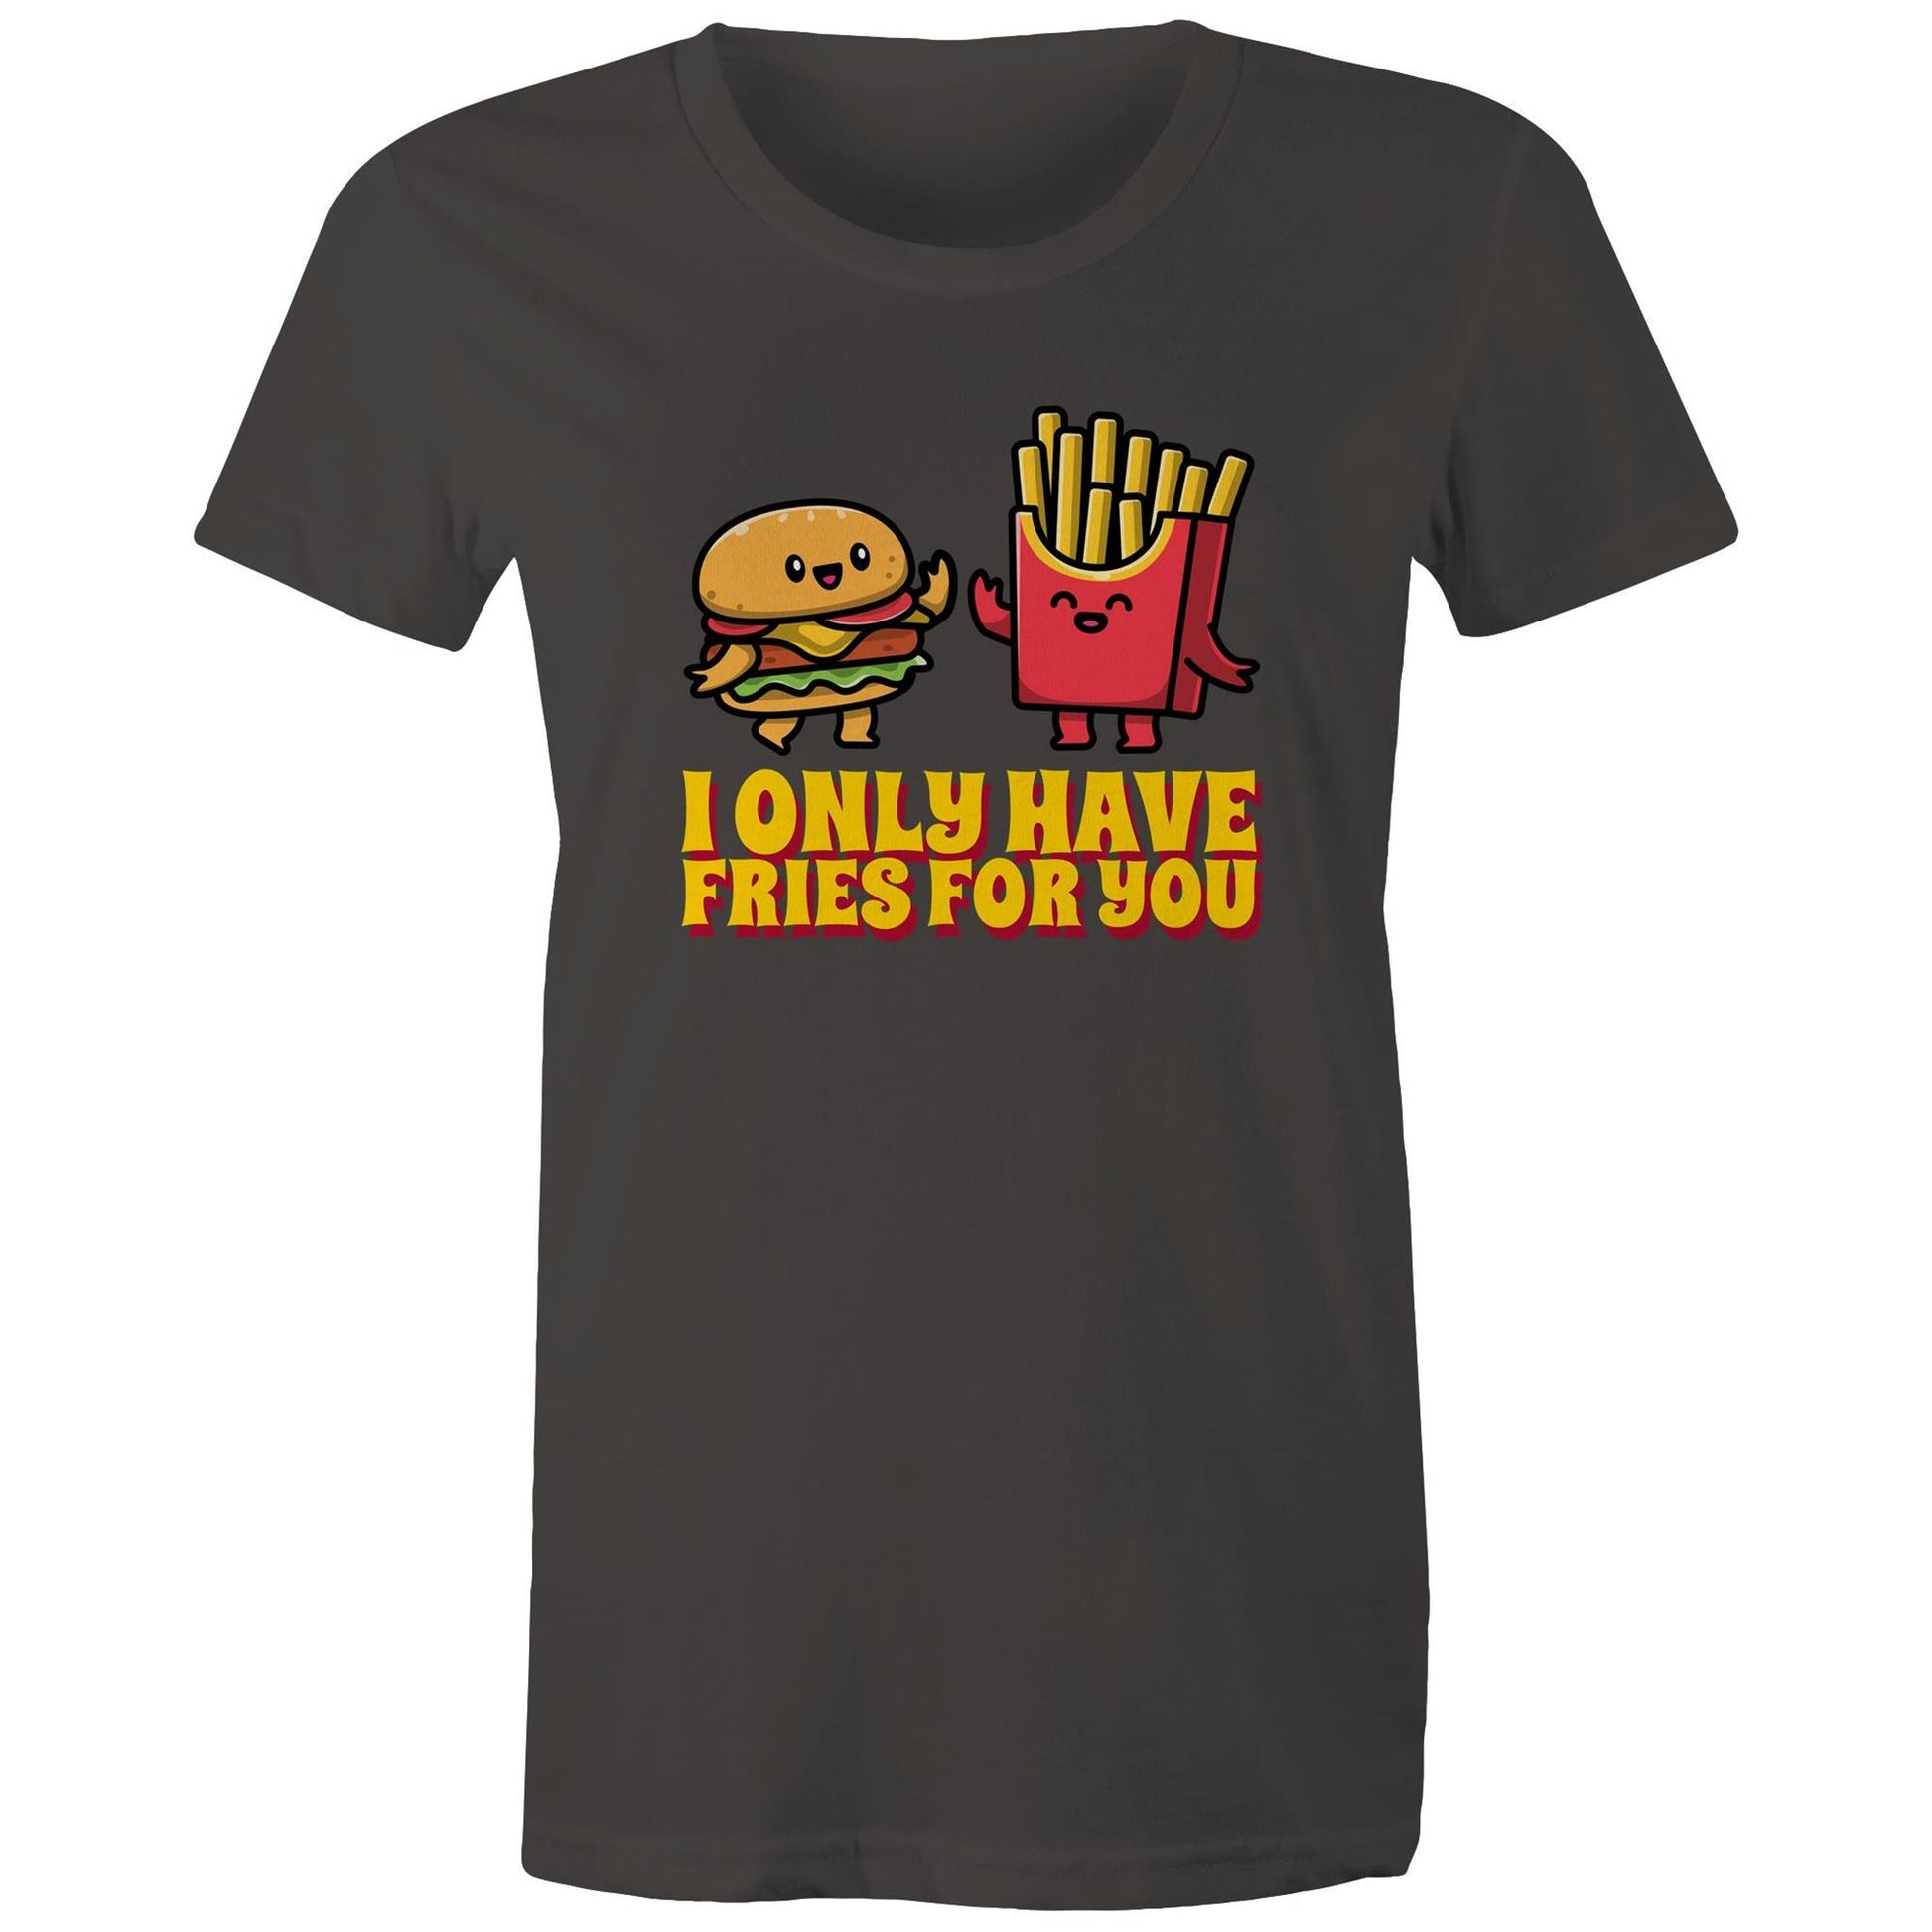 I Only Have Fries For You, Burger And Fries - Womens T-shirt Charcoal Womens T-shirt